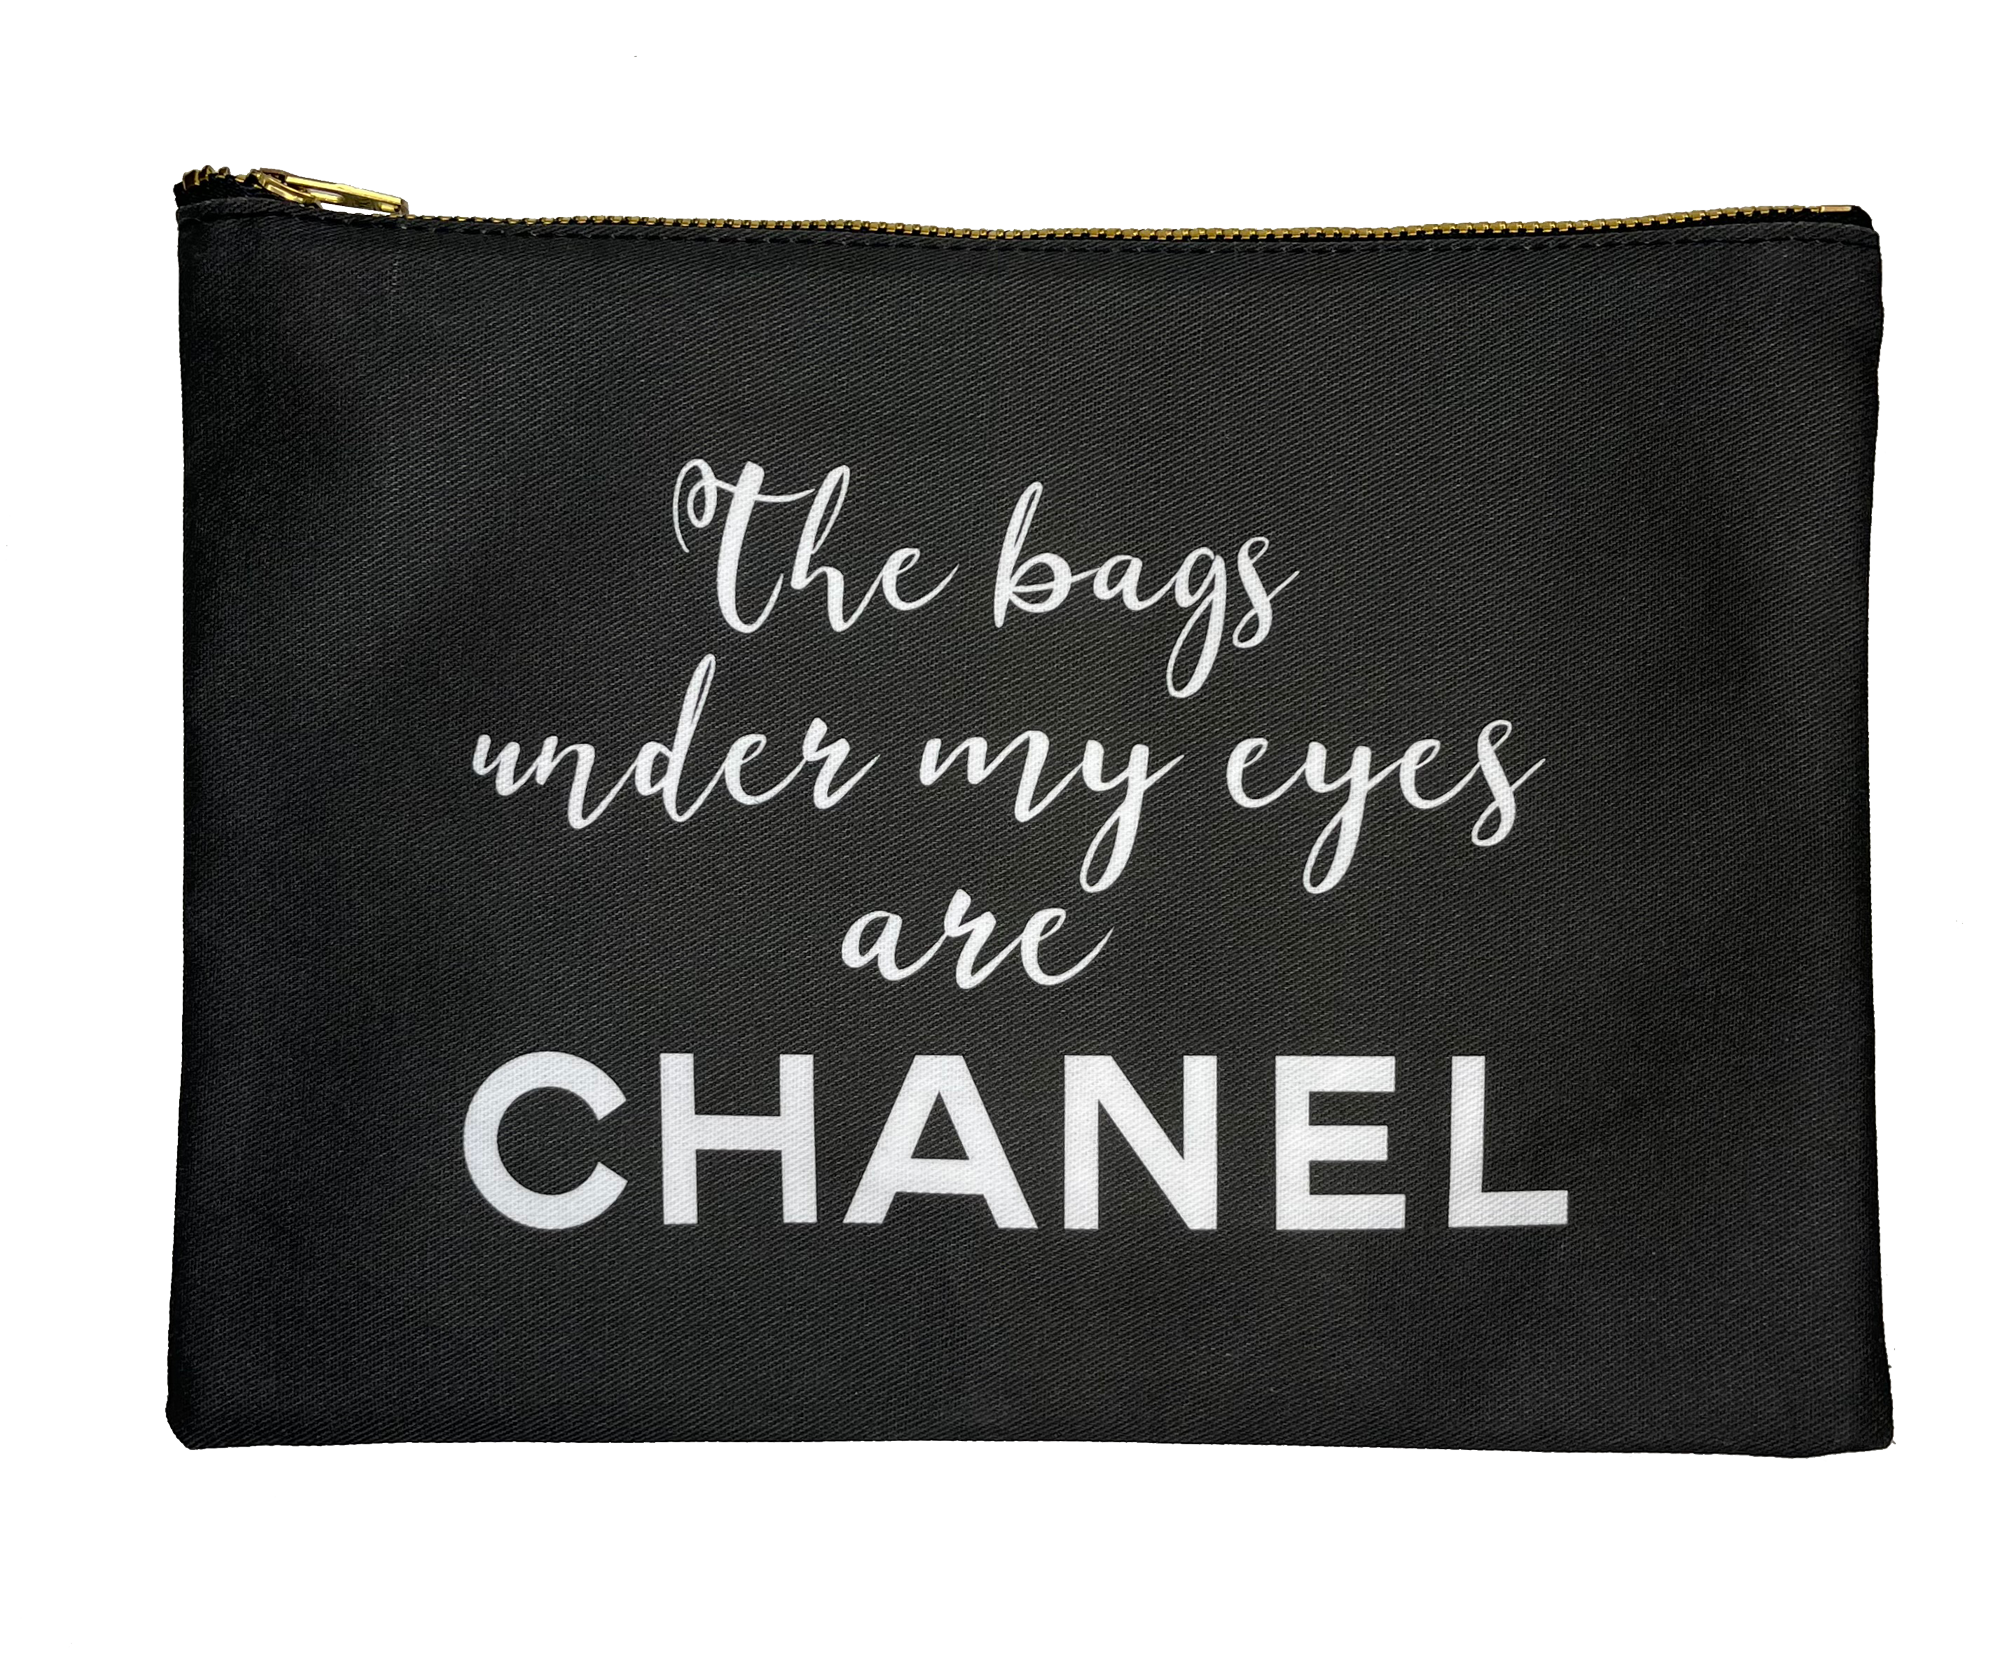 Pouch Black with Chanel Saying